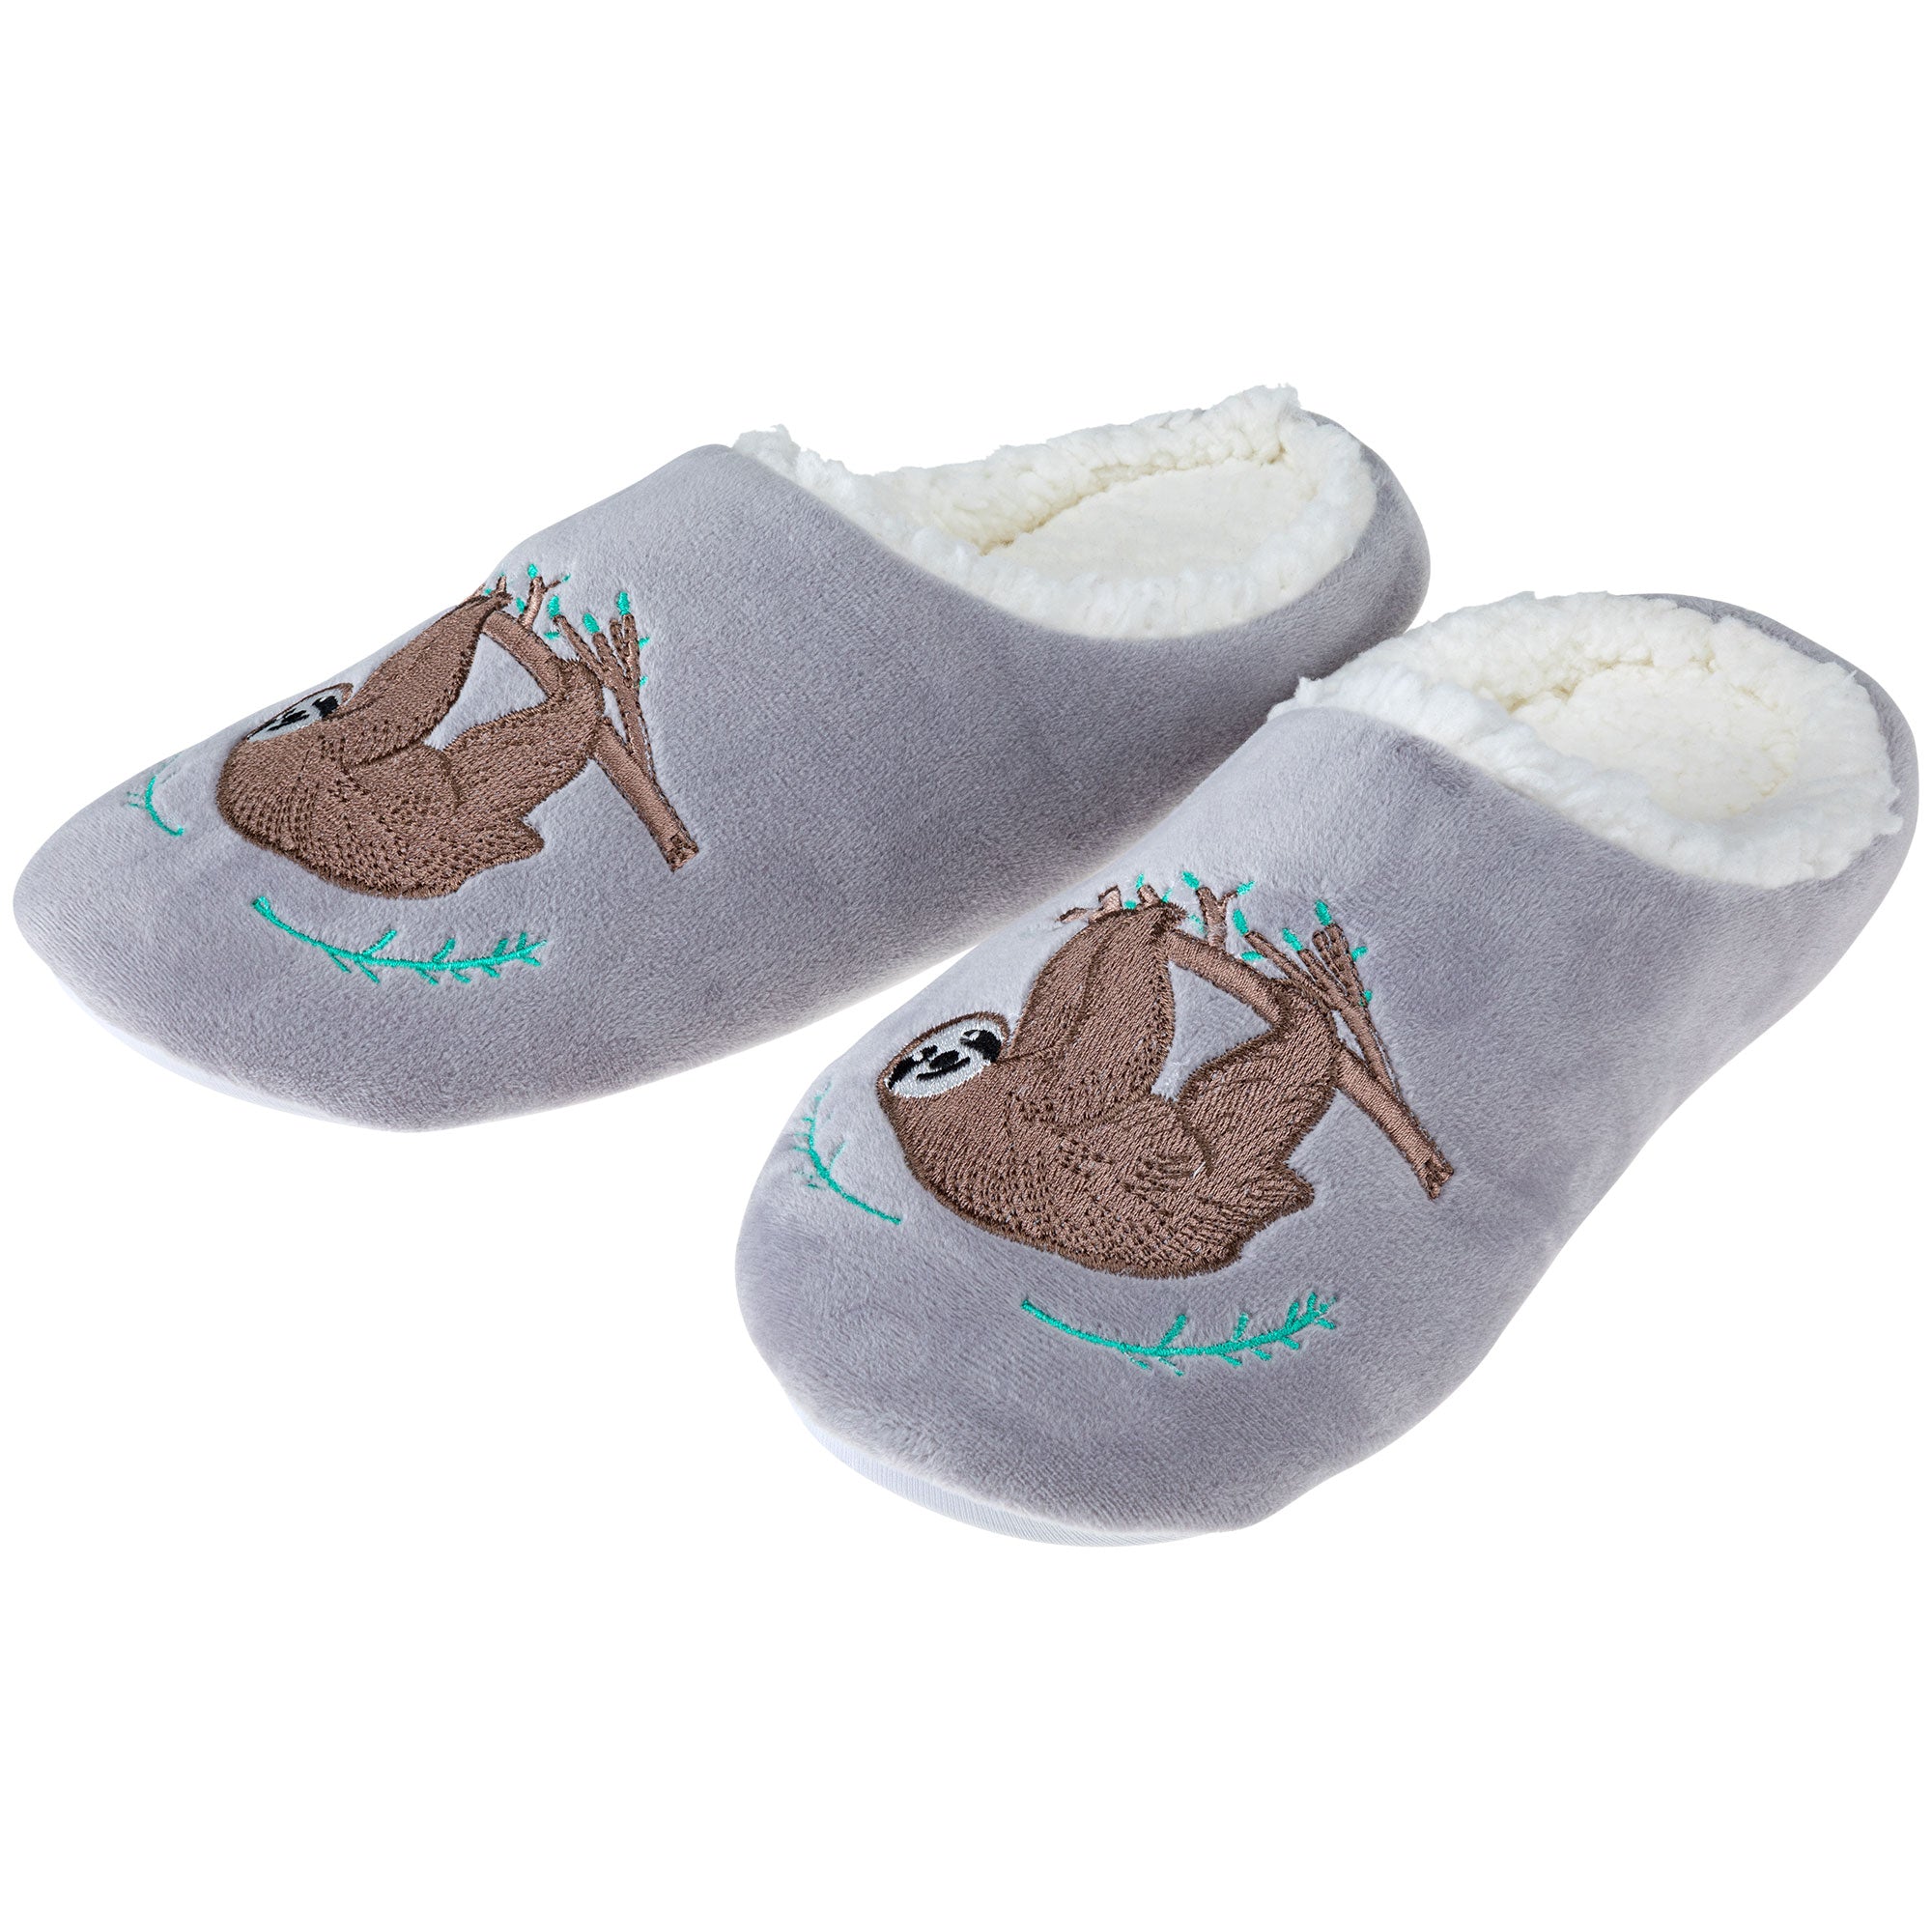 Women's Wildly Adorable Comfy Slippers - Sloth - S